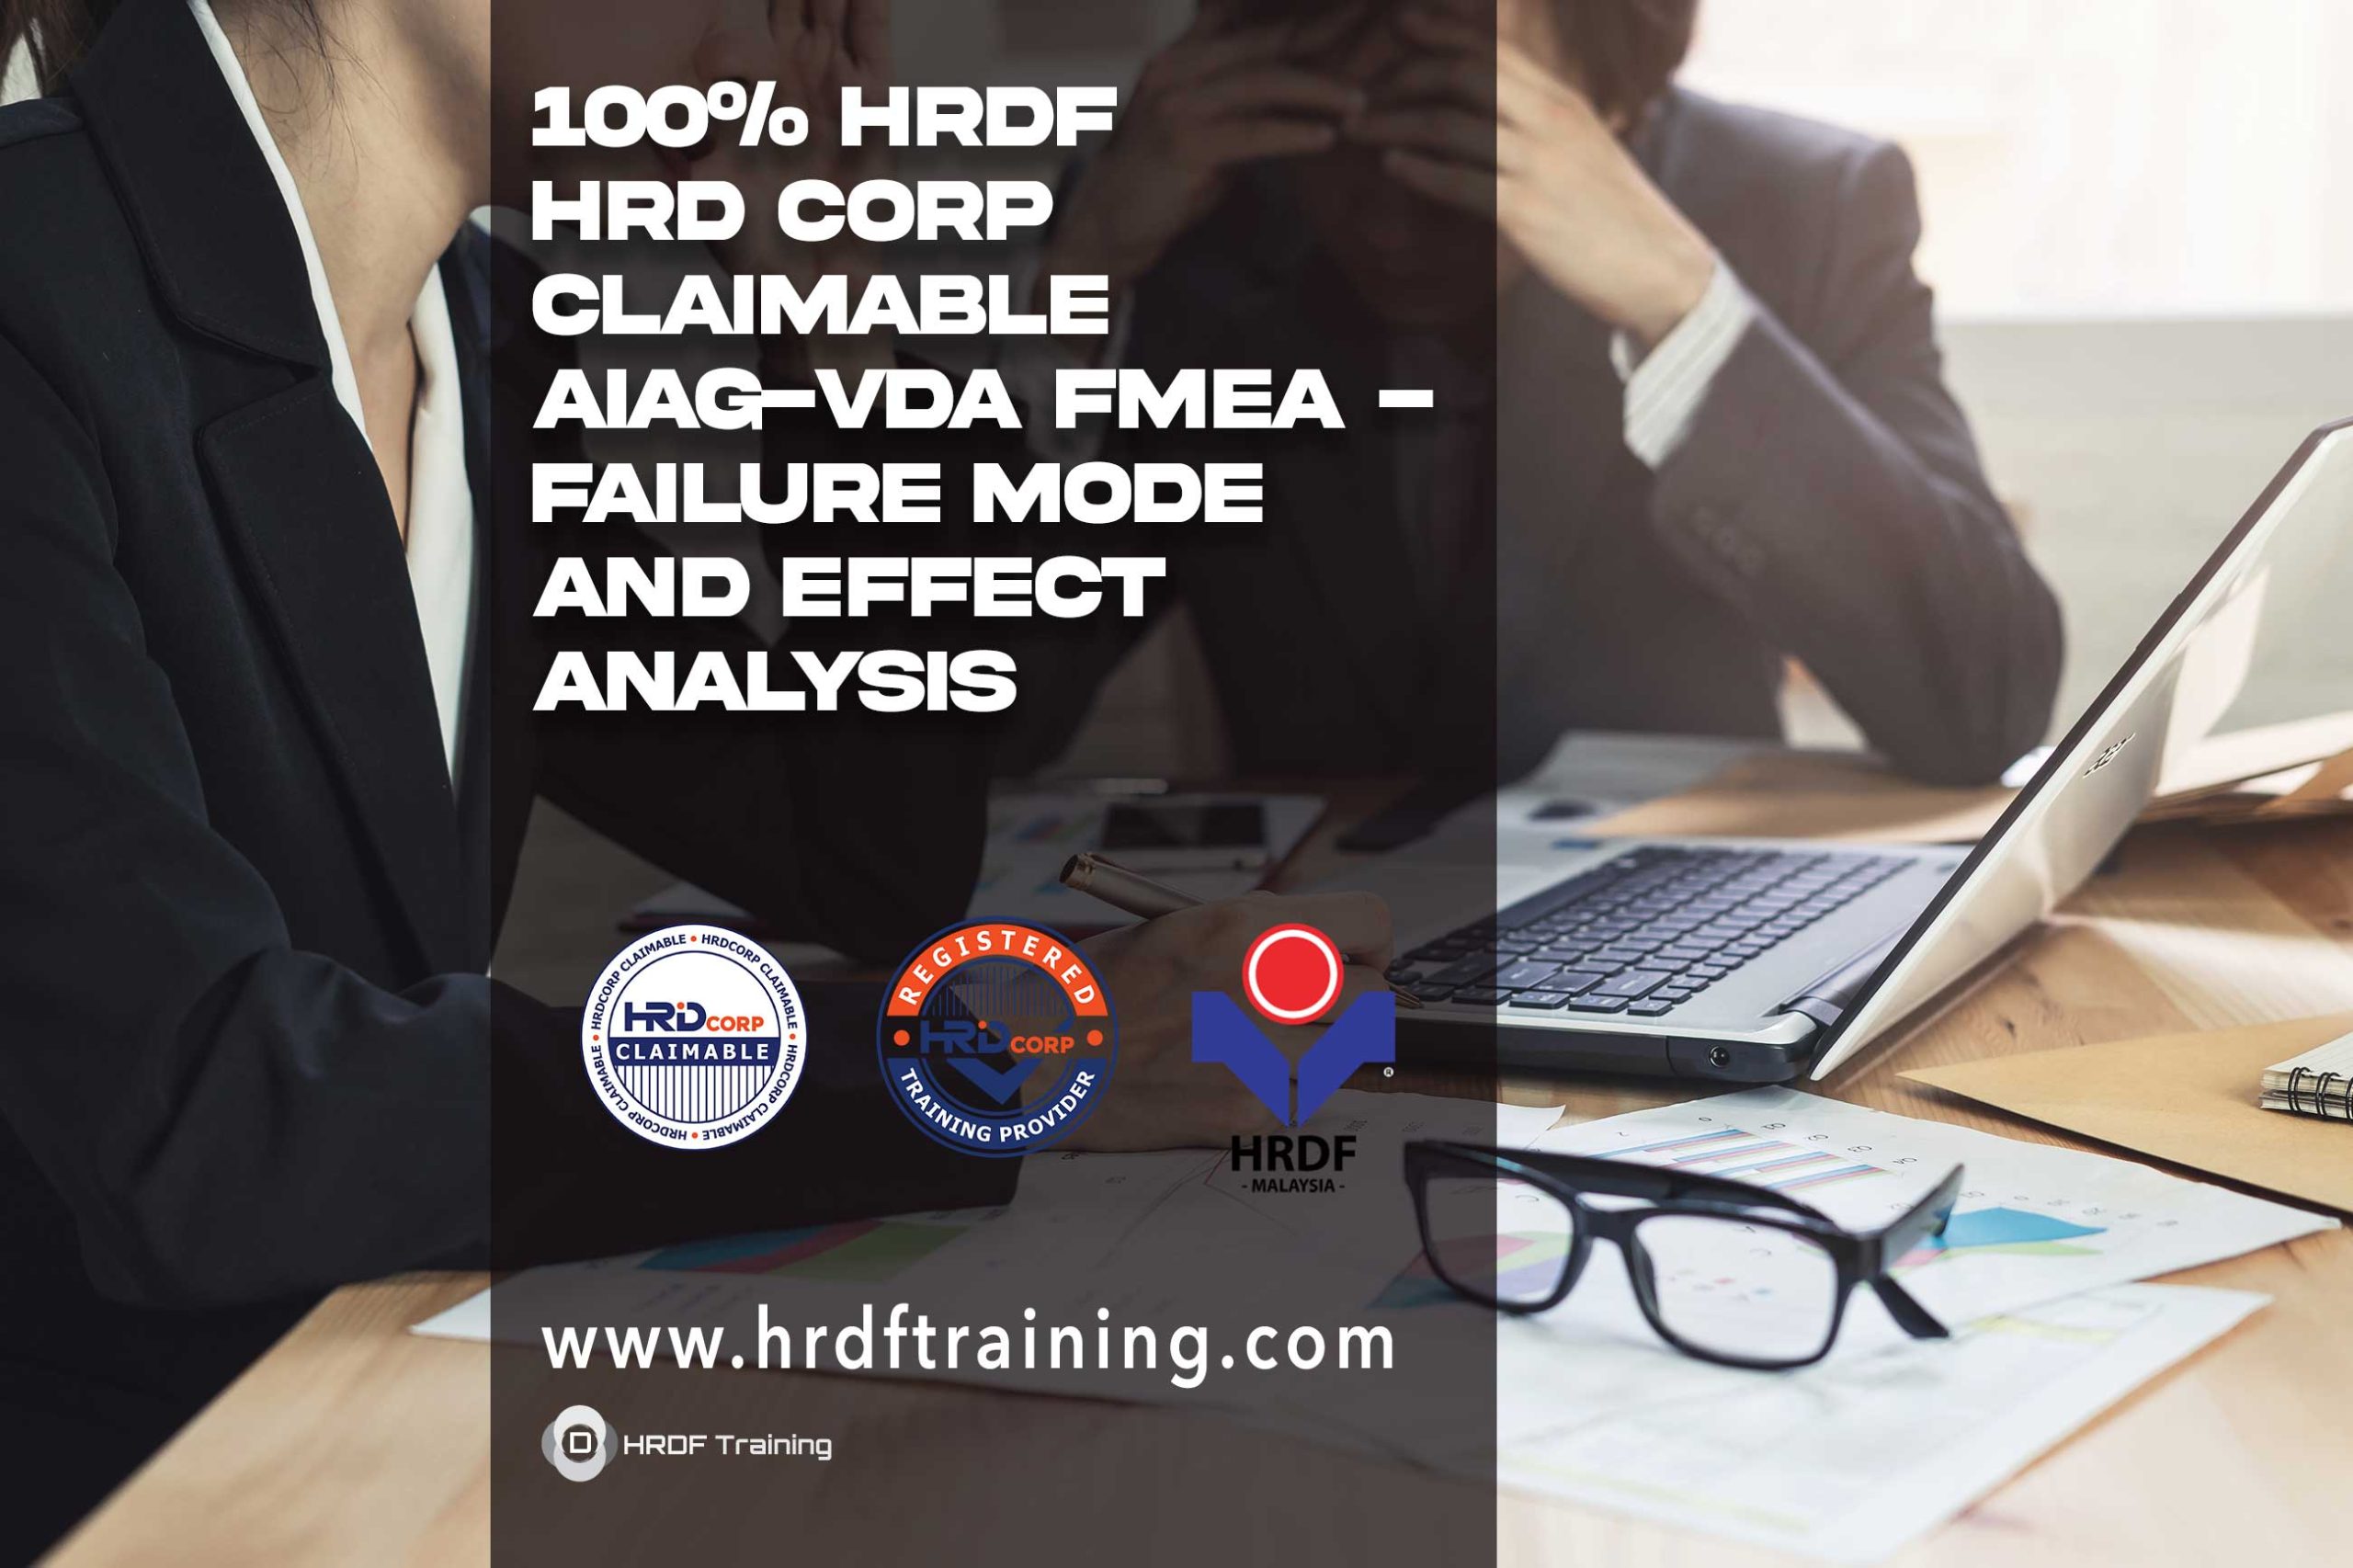 HRDF-HRD-Corp-Claimable-AIAG-VDA-FMEA—Failure-Mode-and-Effect-Analysis